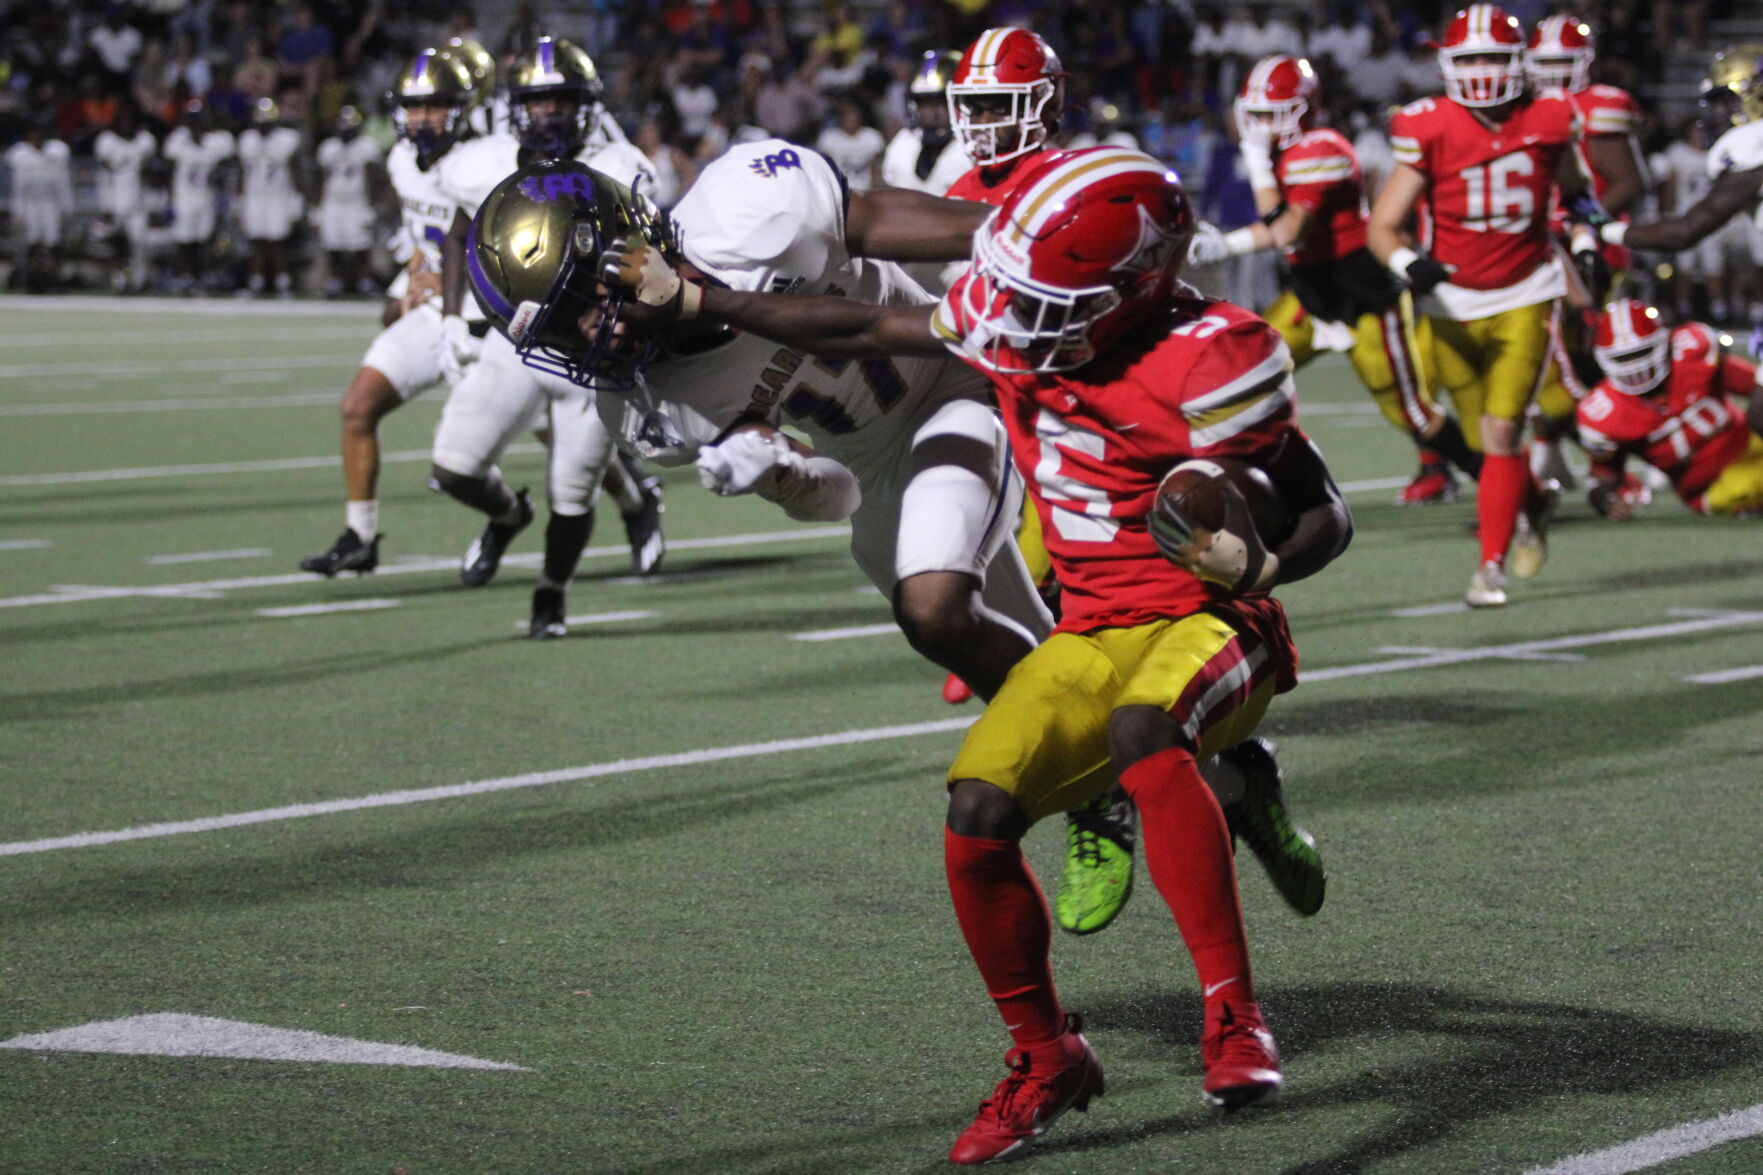 Thomasville Bulldogs face tough non-region schedule, poised to bounce back in region play